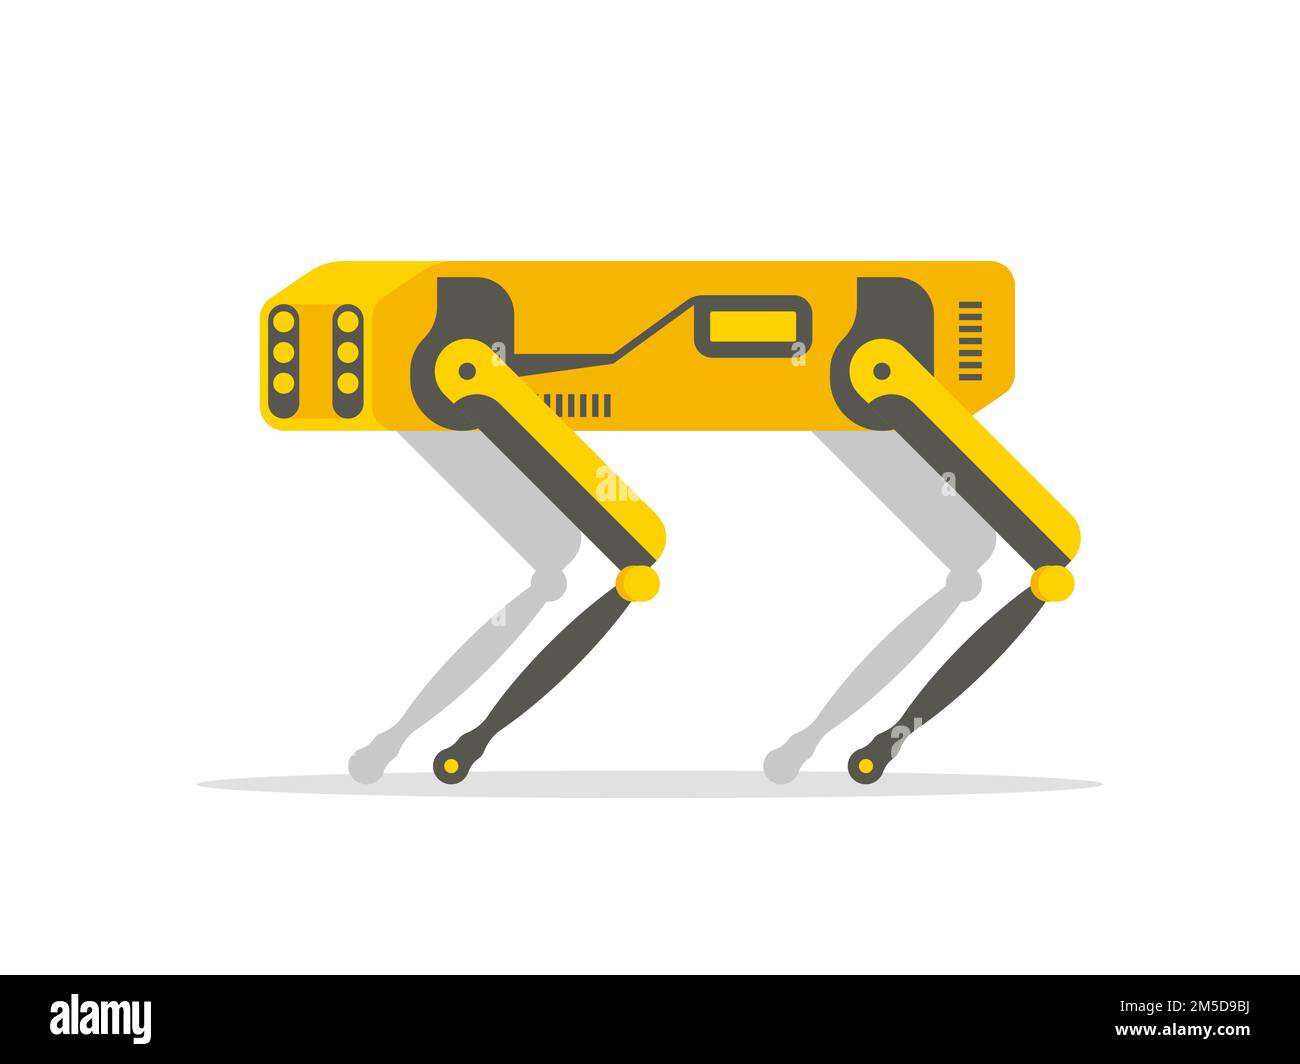 The mechanical robot dog guard. Industrial sensing and remote operation needs. Innovation in high technology. Vector flat graphic illustration Stock Vector